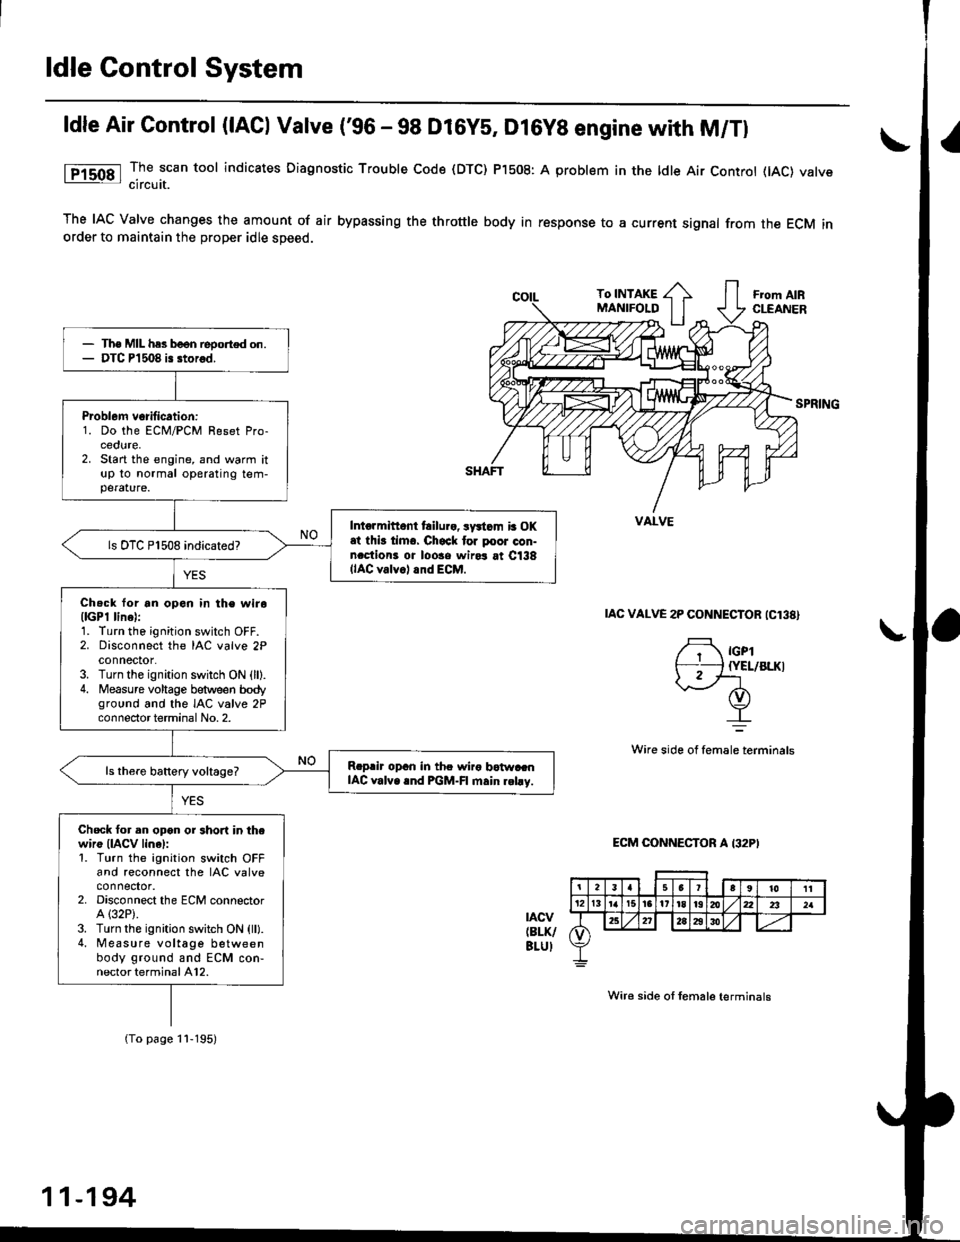 HONDA CIVIC 1997 6.G Workshop Manual ldle Control System
ldle Air Control (lACl Vatve (96 - 98 Dl6ys, Dl6yB engine with M/Tl
The scan tool indicates Diagnostic Trouble Code (DTC) P1508: A problem in the ldle Air Controt flAC) varvecircu